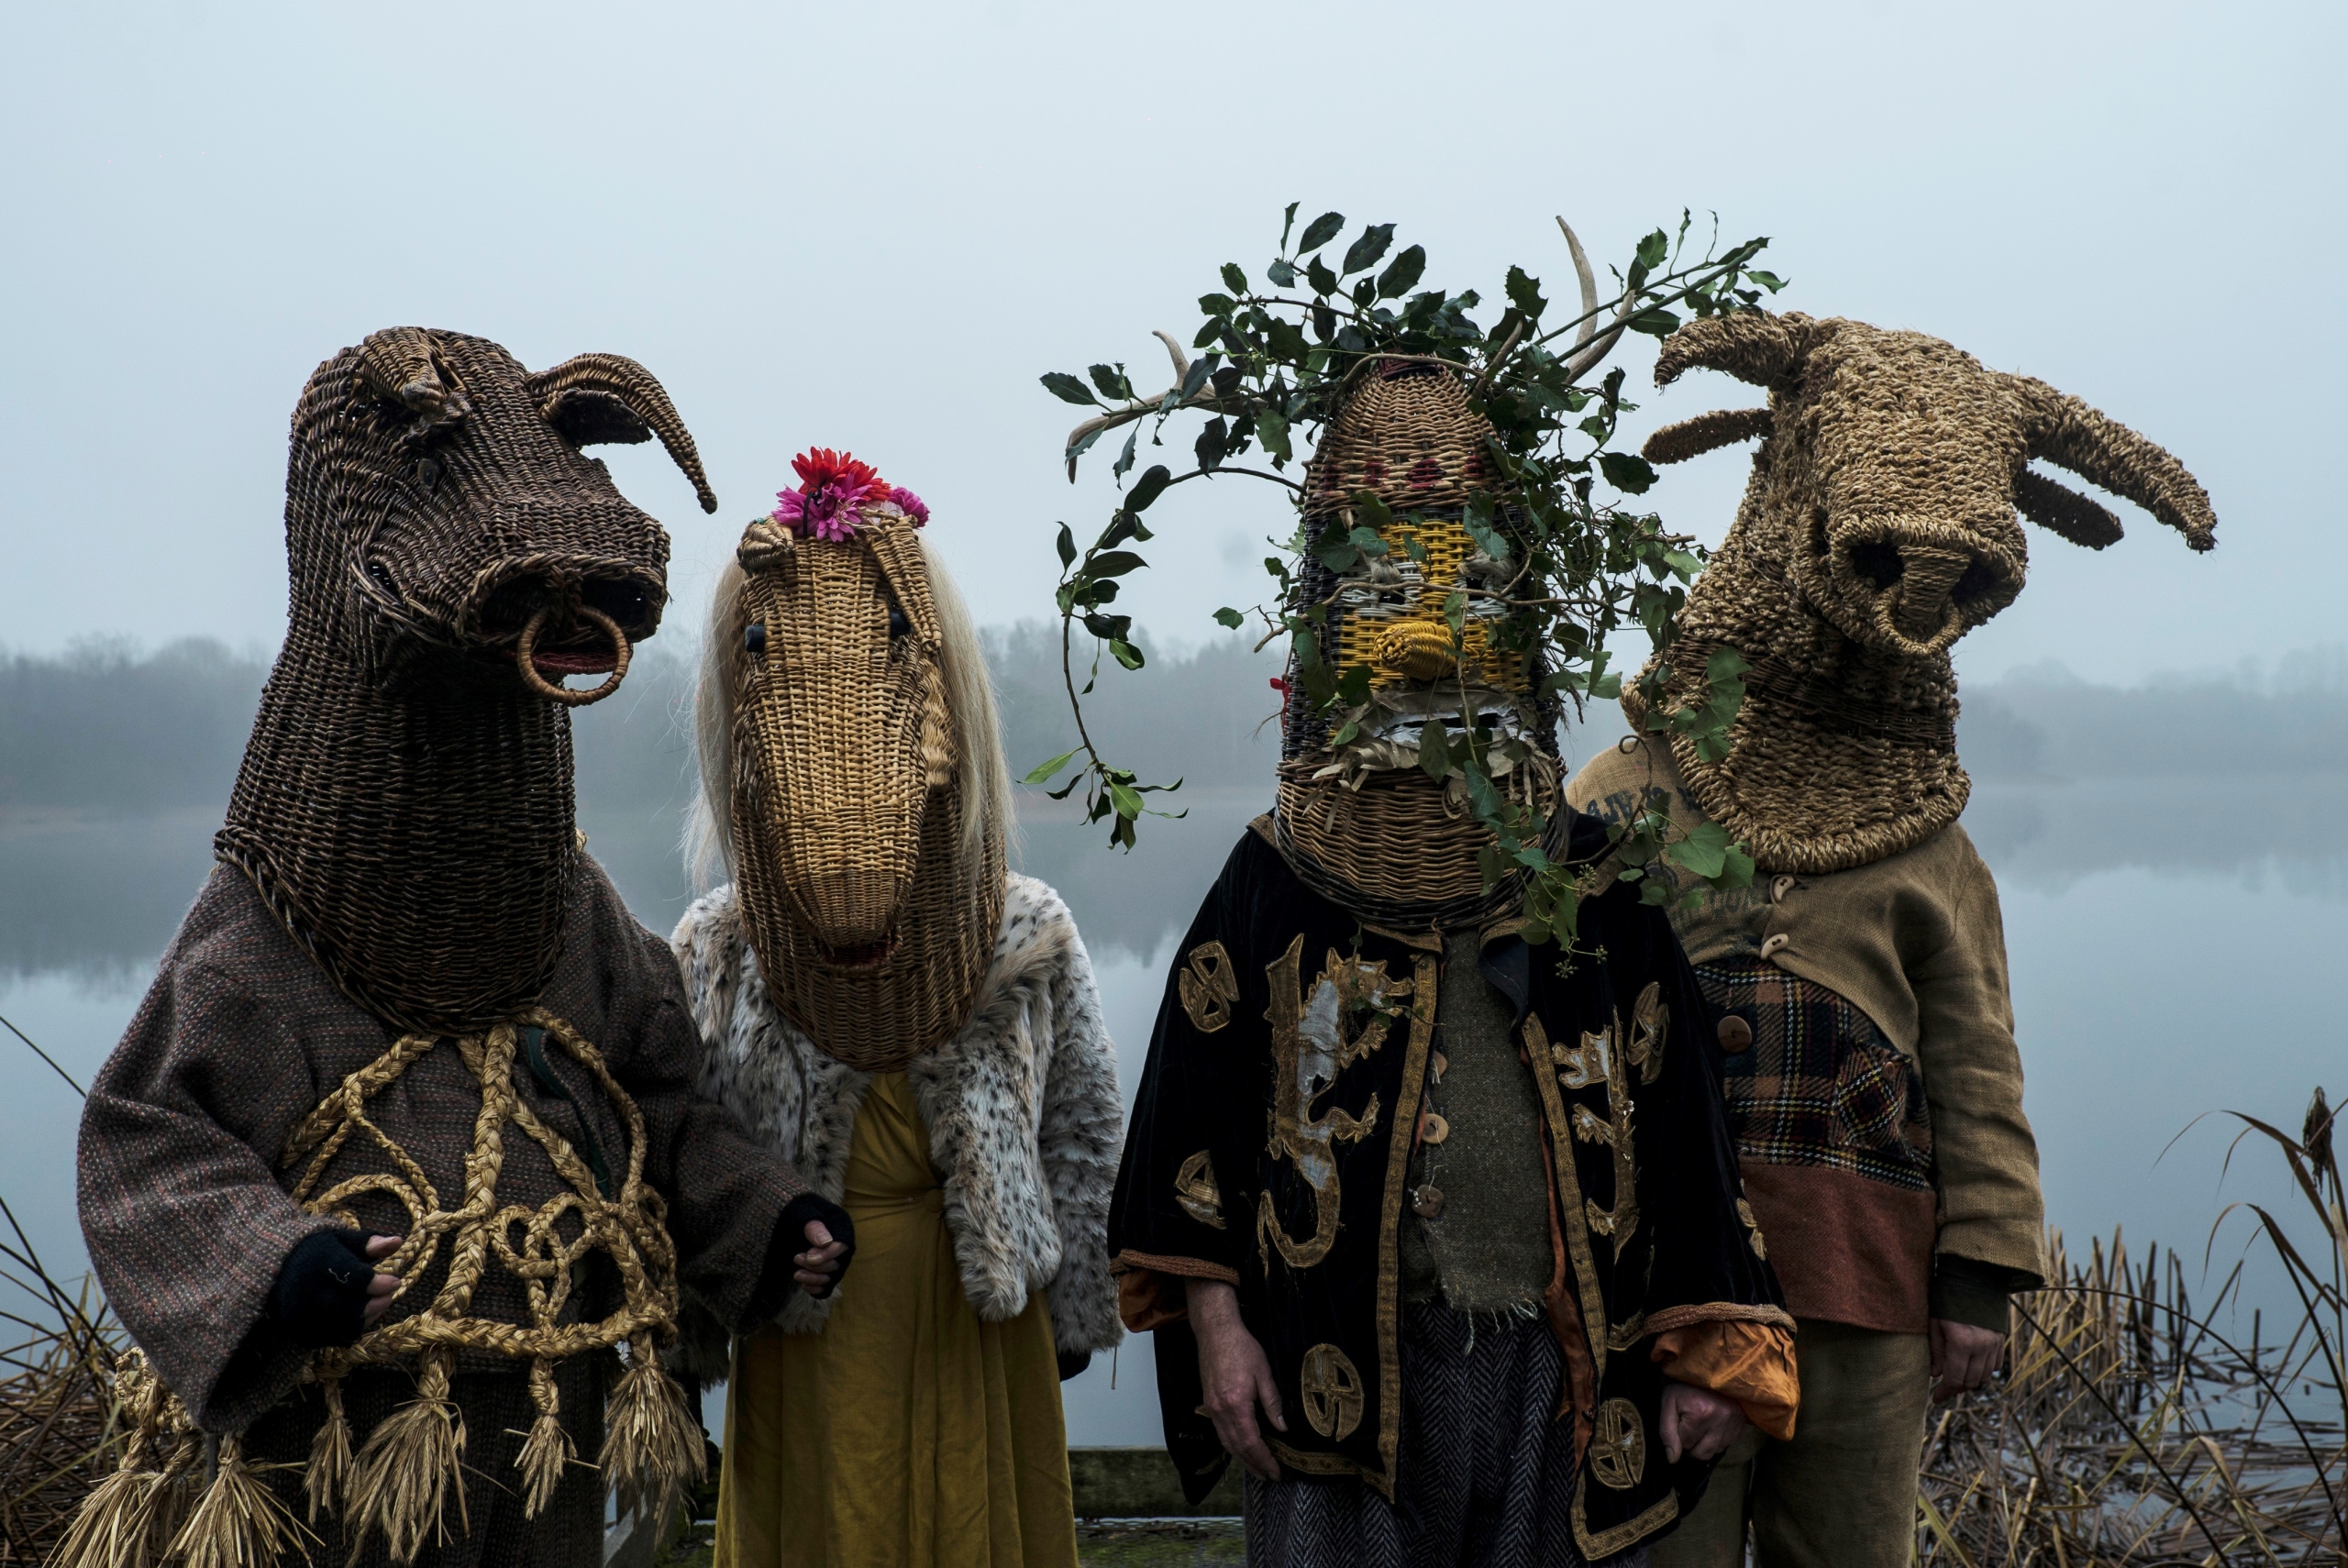 fourcharacters dressed in costume with their faces invisible